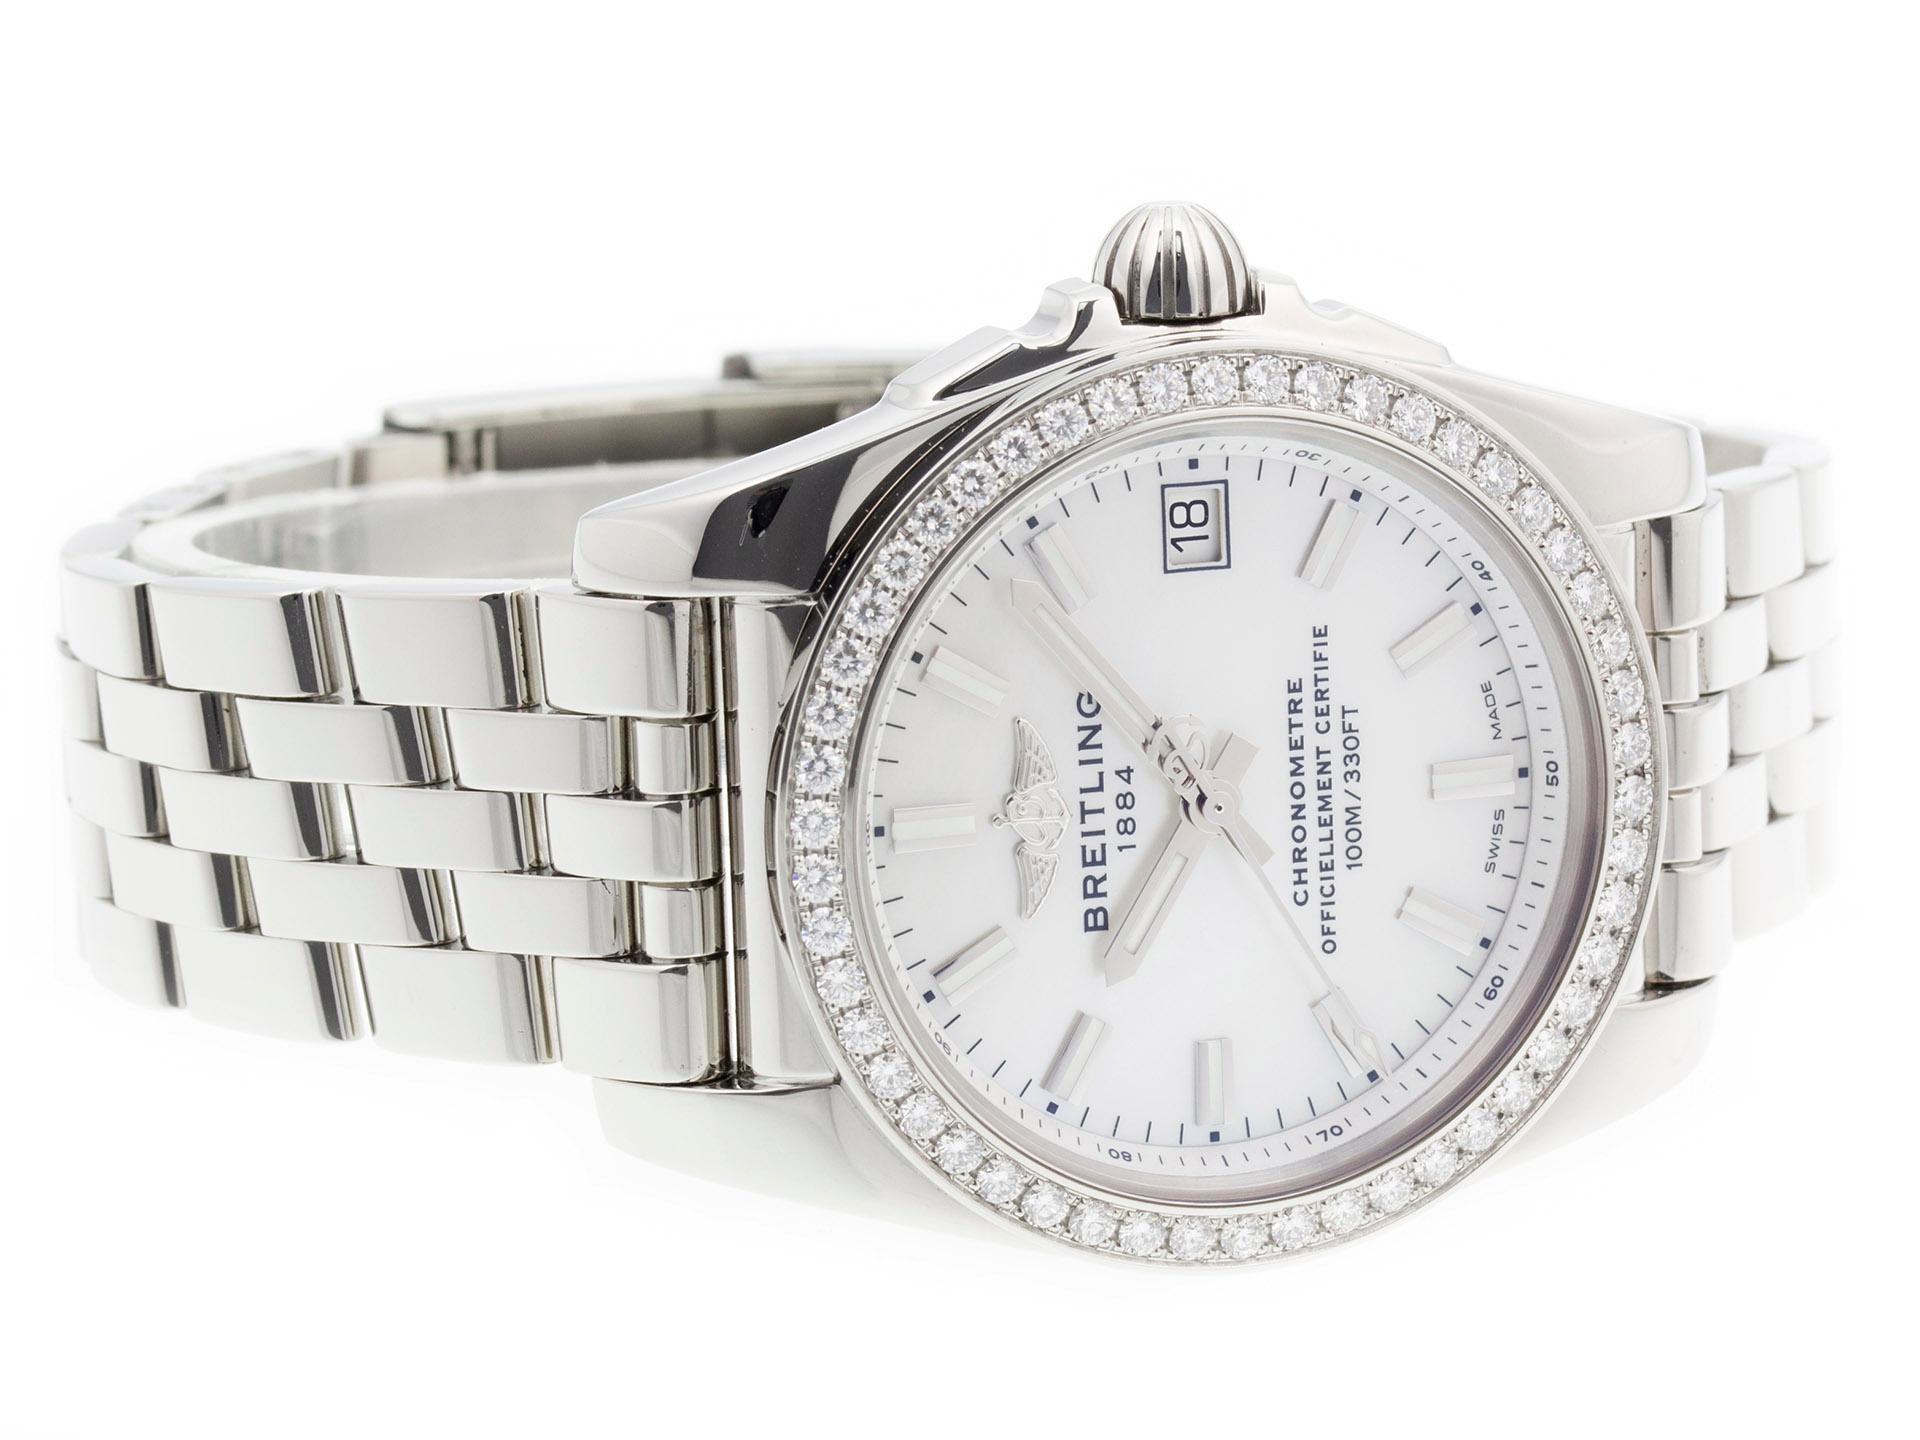 Stainless steel Breitling Galactic 36 SleekT A74330 watch, water resistant to 100m, with diamond bezel and date.

Watch	
Brand:	Breitling
Series:	Galactic 36 SleekT
Model #:	A7433053/A779​
Gender:	Ladies’
Condition:	Excellent Display Model, Faint